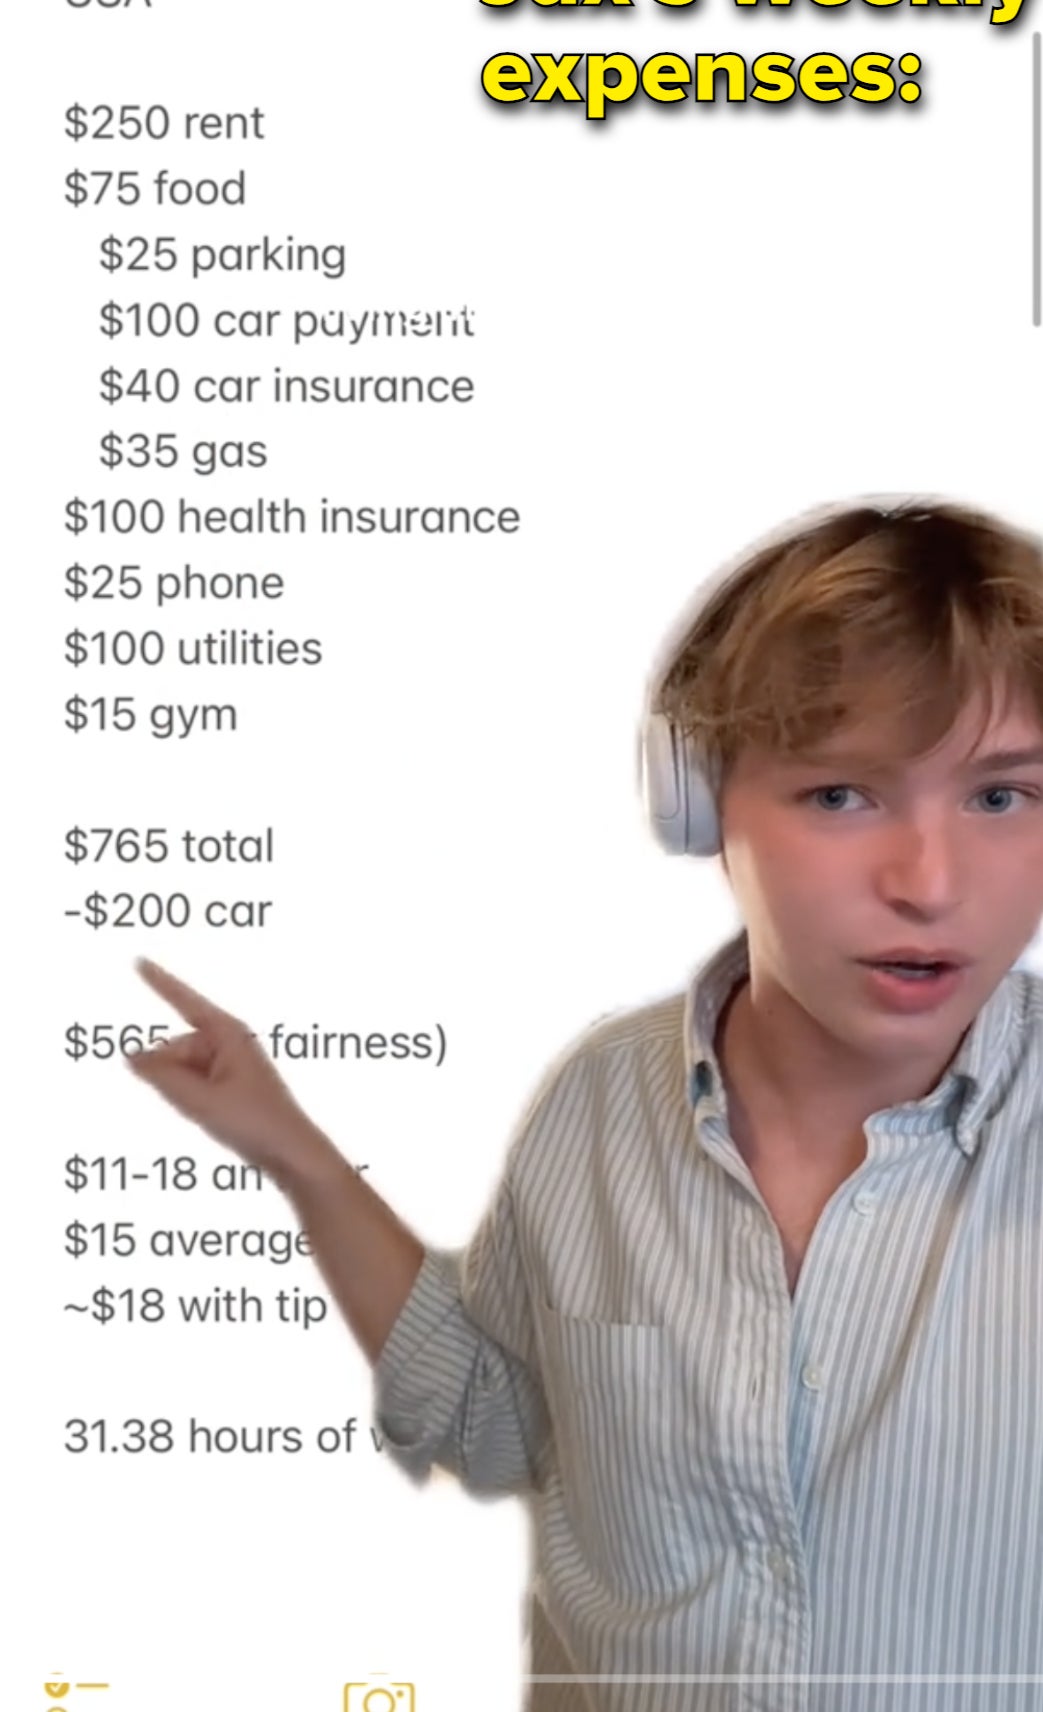 Person presenting a cost breakdown for living expenses, educating about financial planning